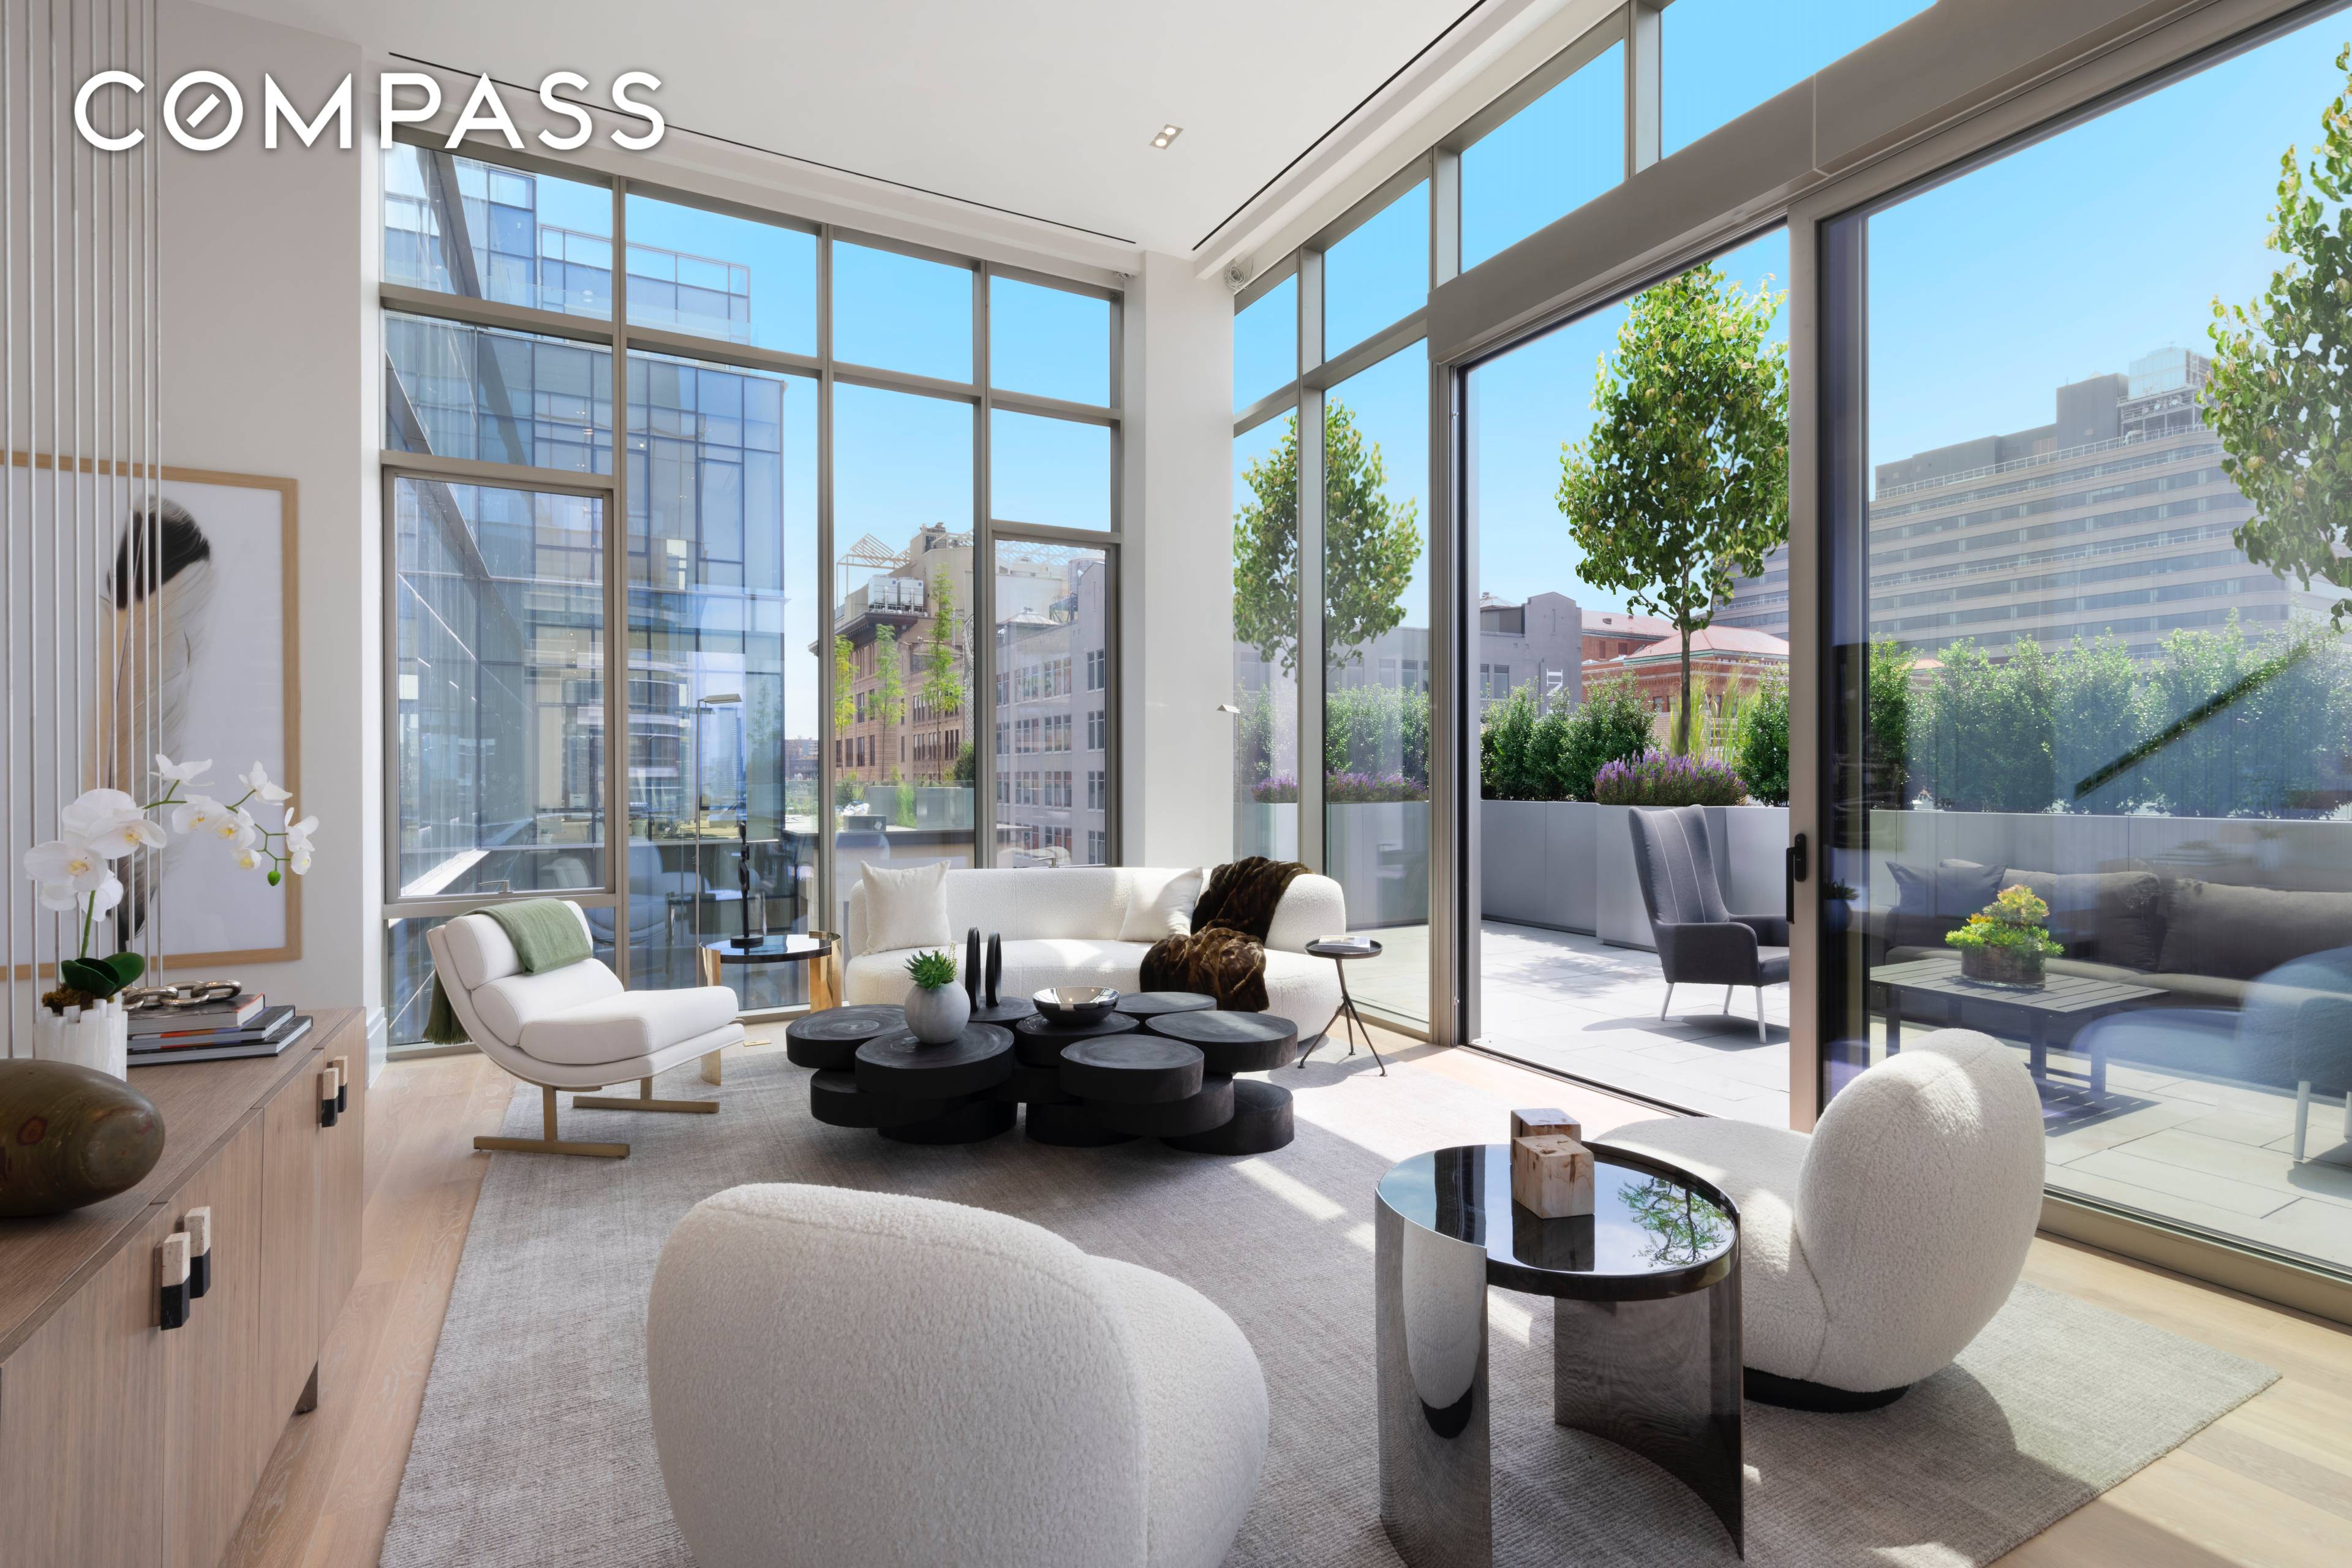 Perched above Washington and Leroy Streets, Penthouse East sprawls across 7, 475 interior square feet and 1, 693 exterior square feet with 4 exposures.